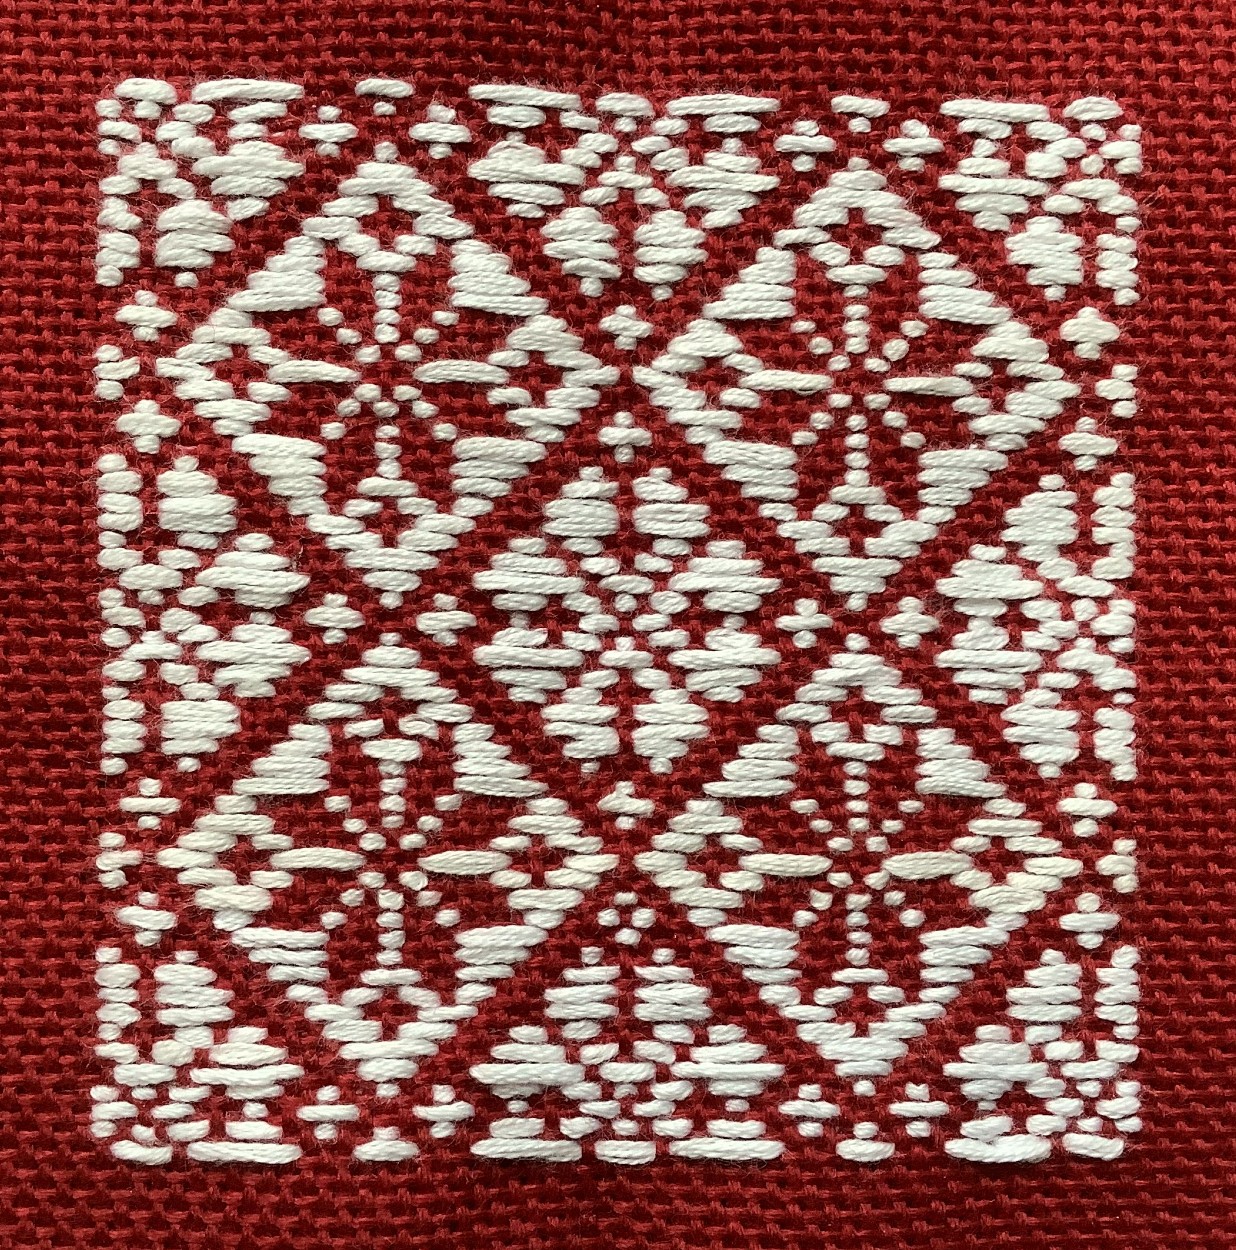 white stitching in geometric pattern on red cloth